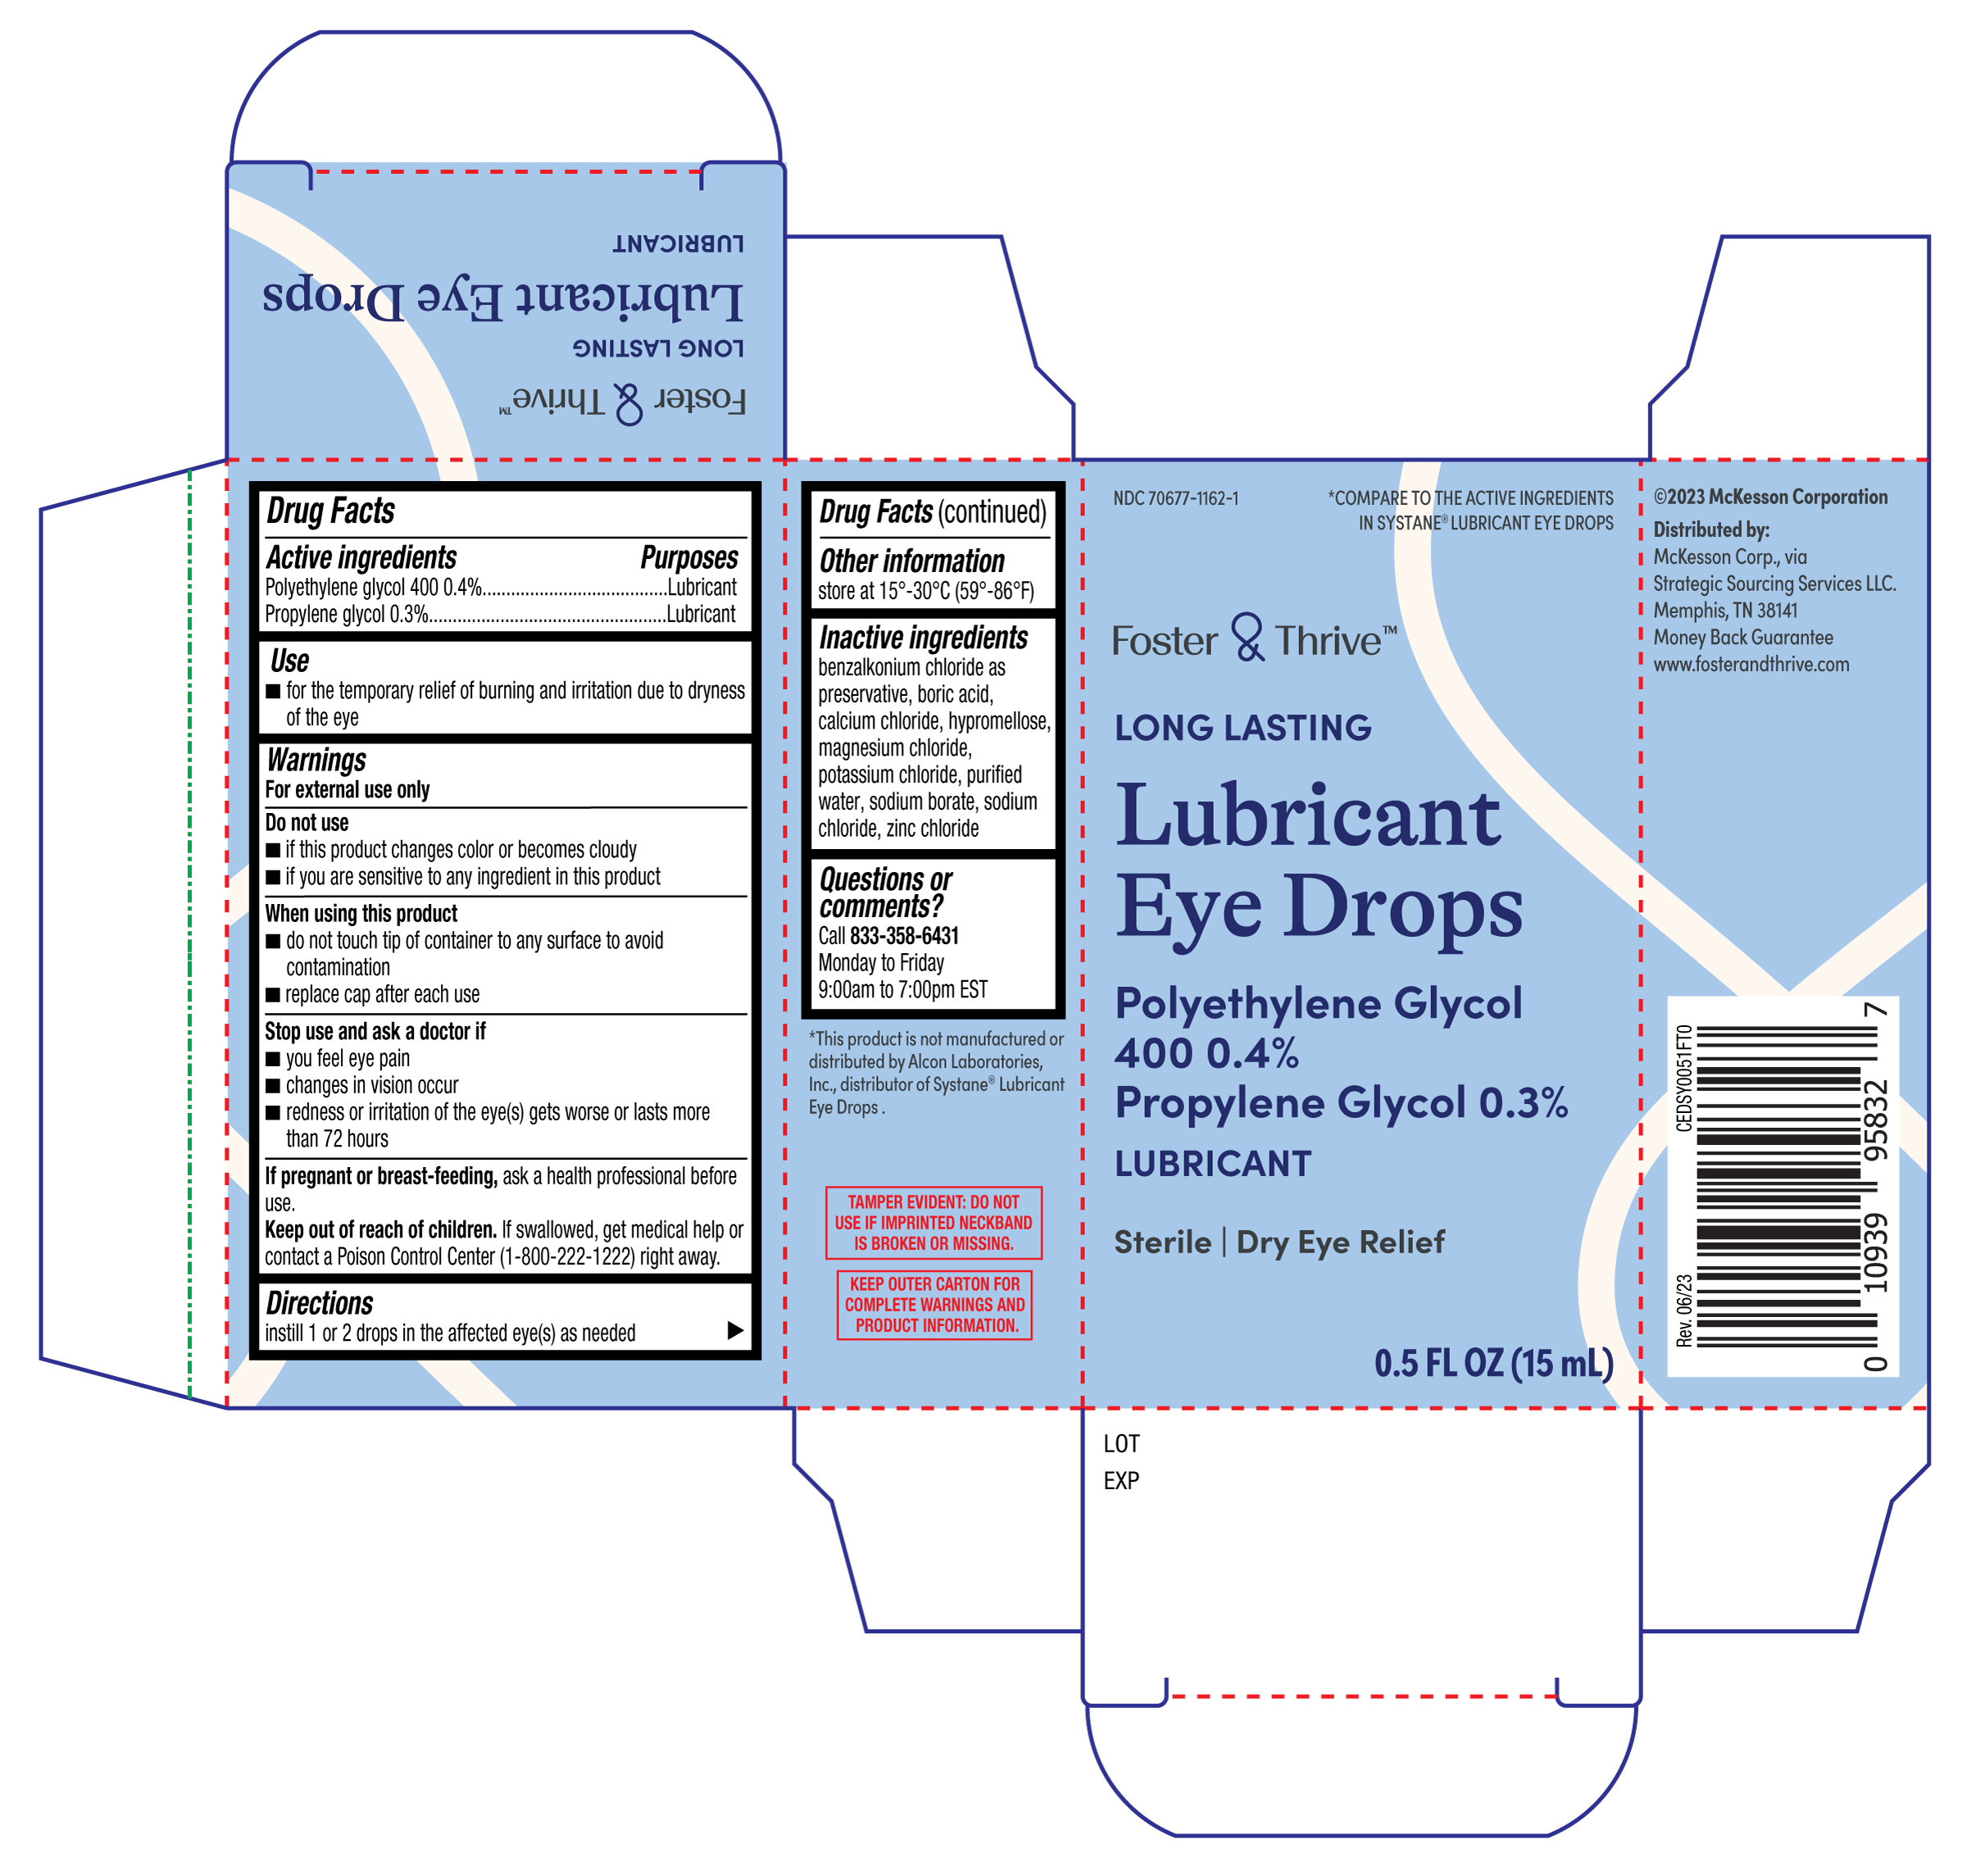 Foster & Thrive Long Lasting Lubricant Eye Drops 15mL